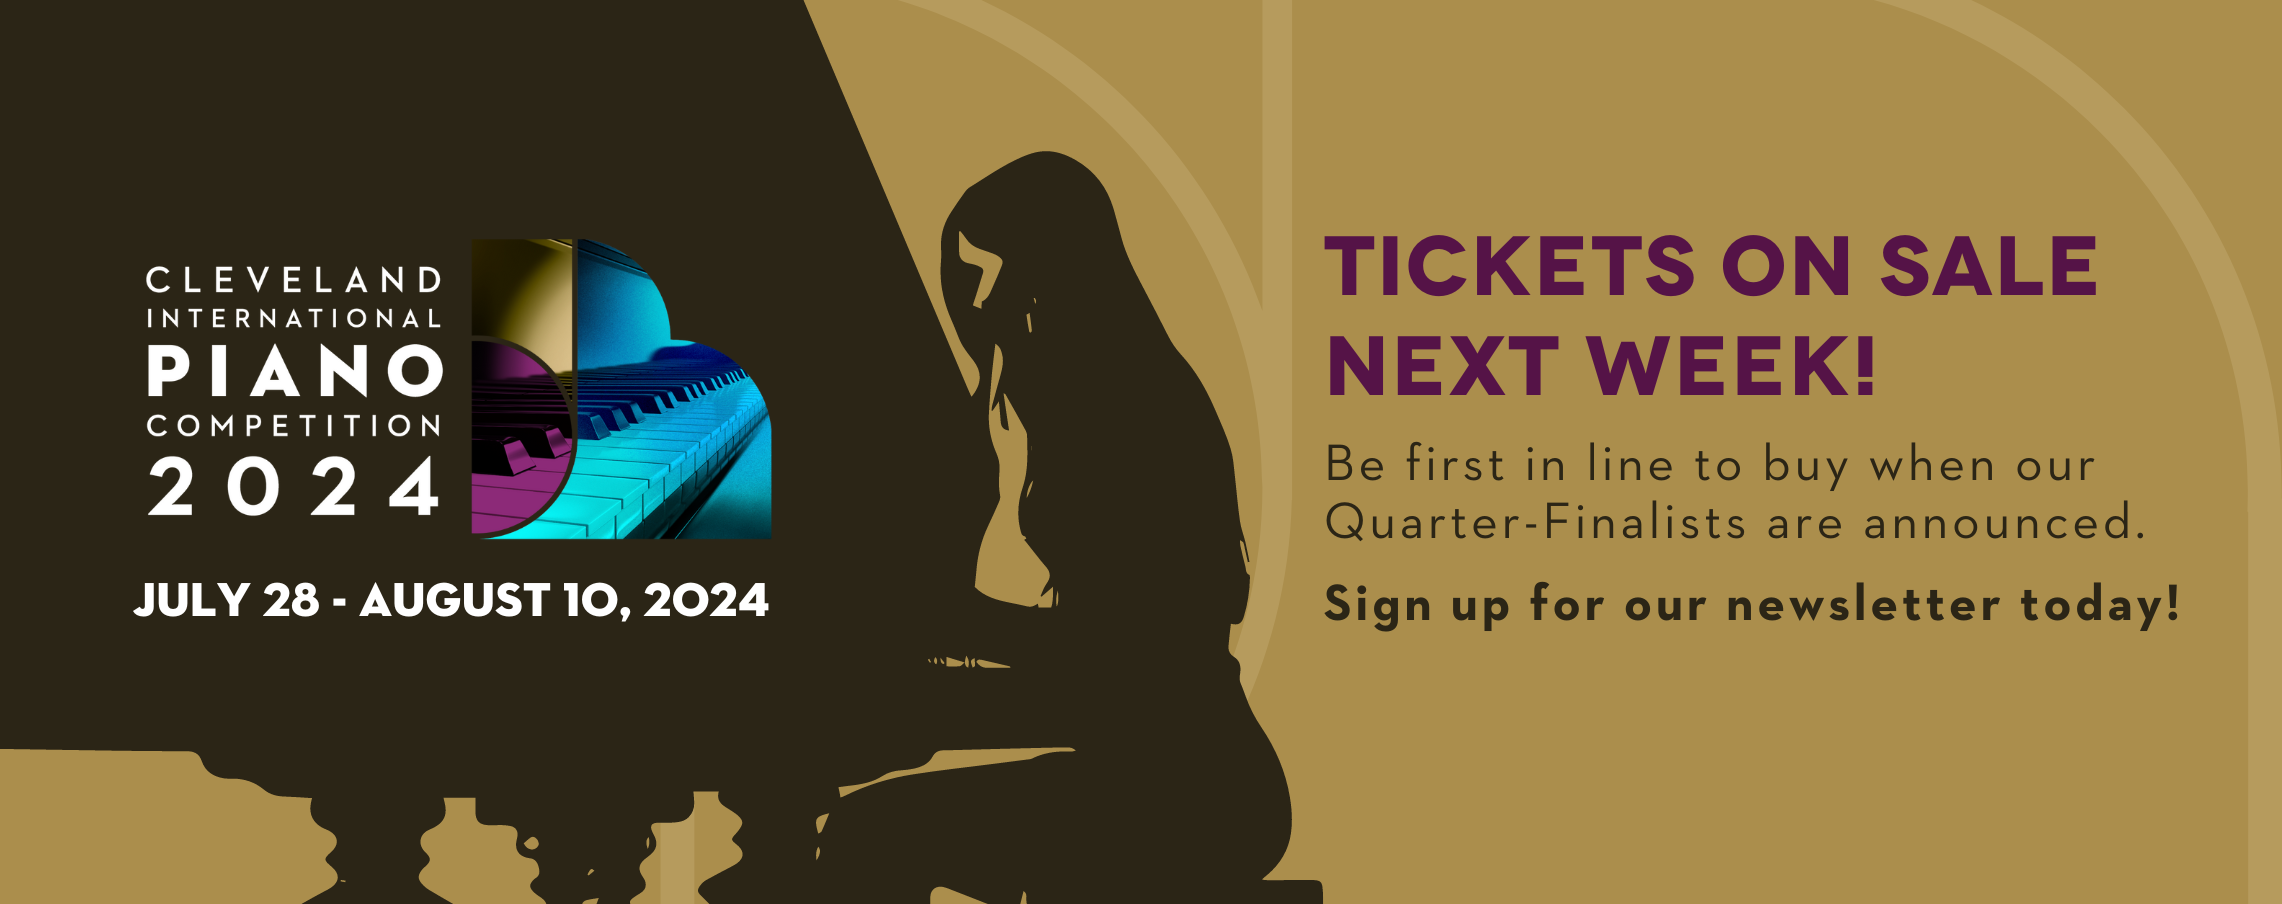 Cleveland International Piano Competition 2024. July 28 - August 10, 2024.